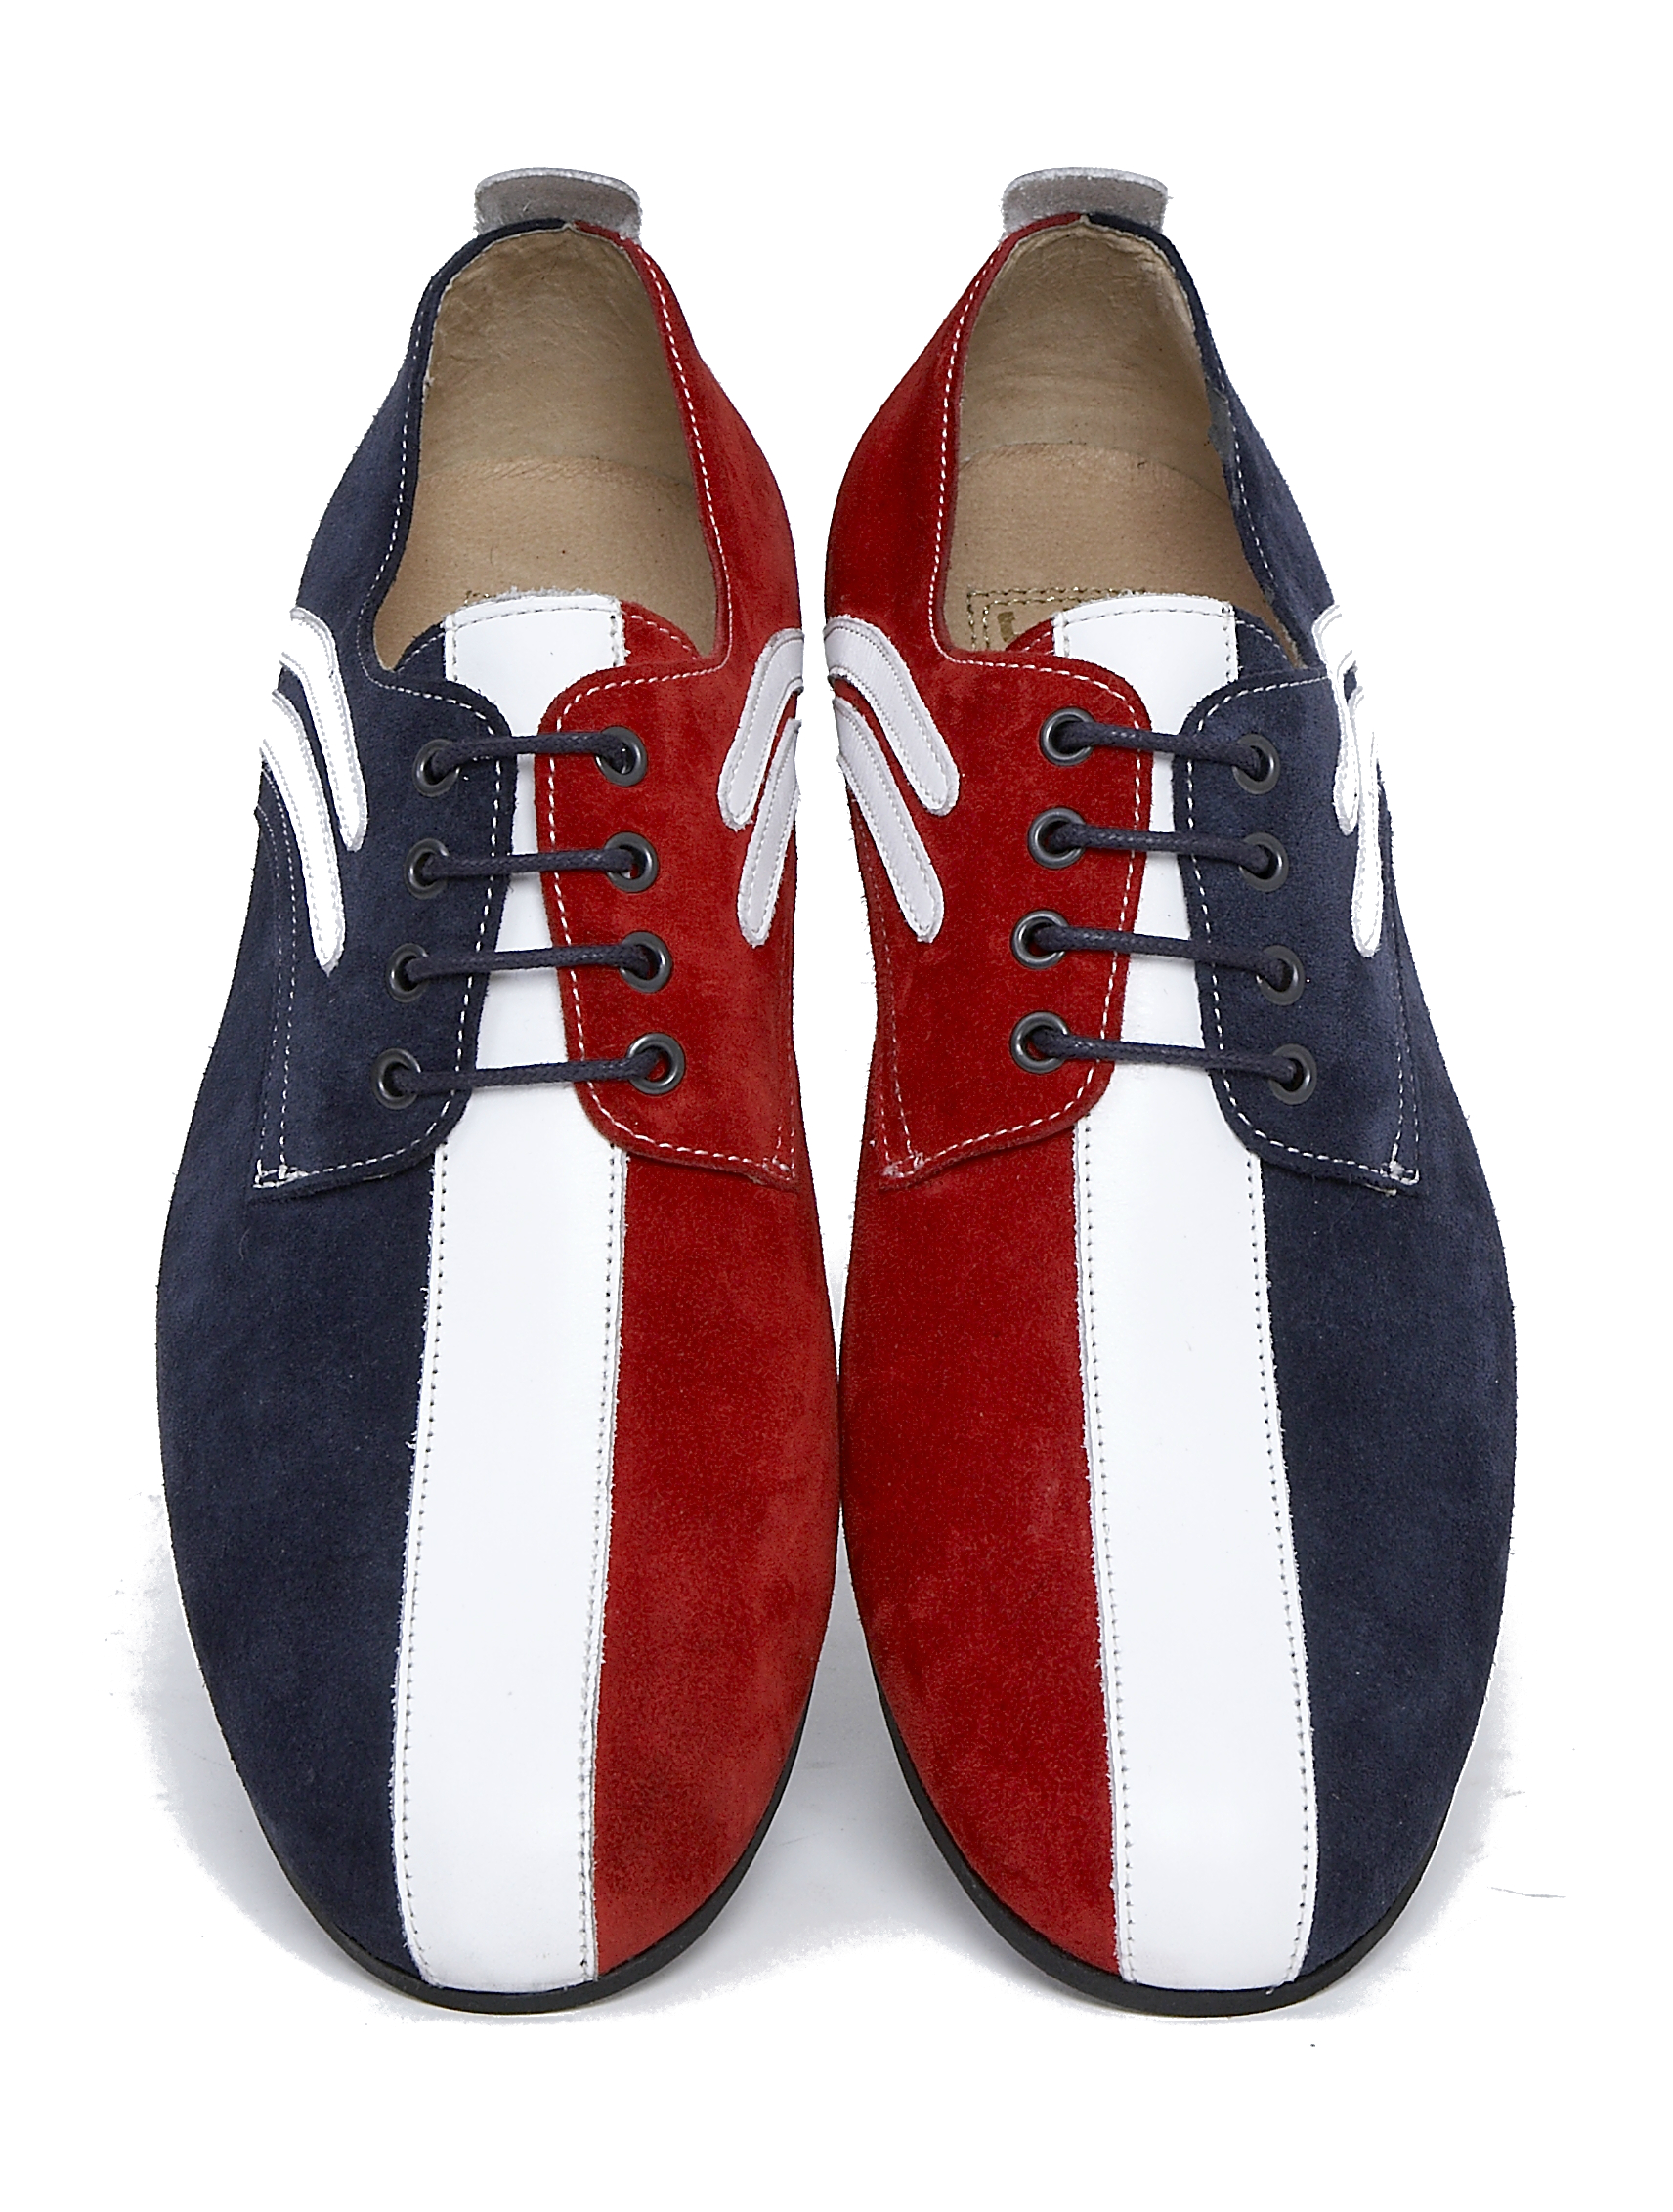 Modshoes jam shoes in red white and blue RIFLERWB1white